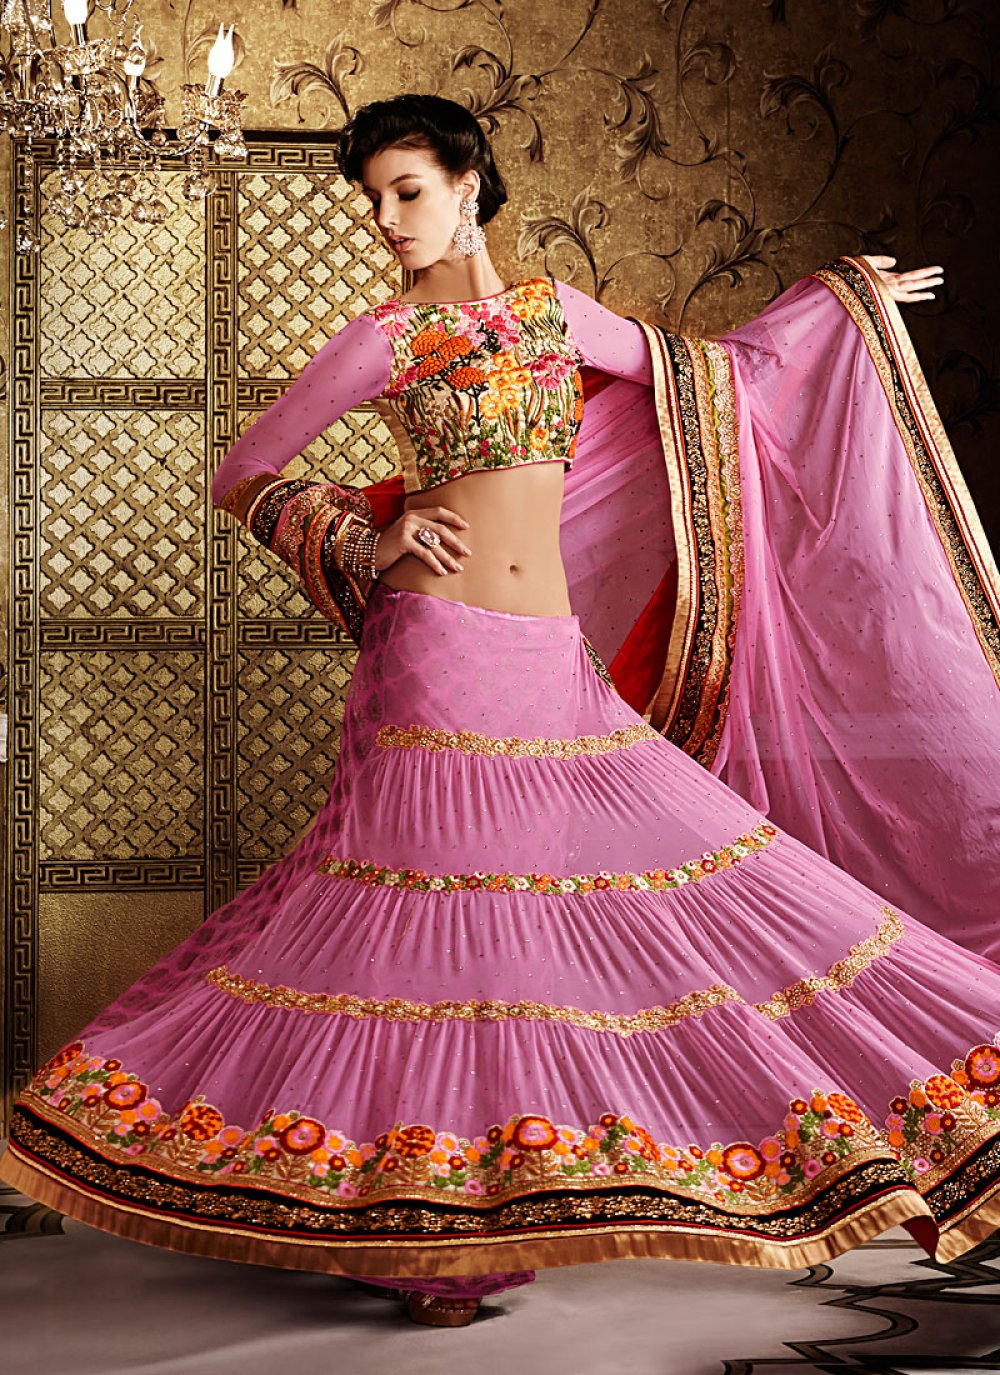 How to Wear Saree in Lehenga Style to Flaunt at a Friend's Wedding